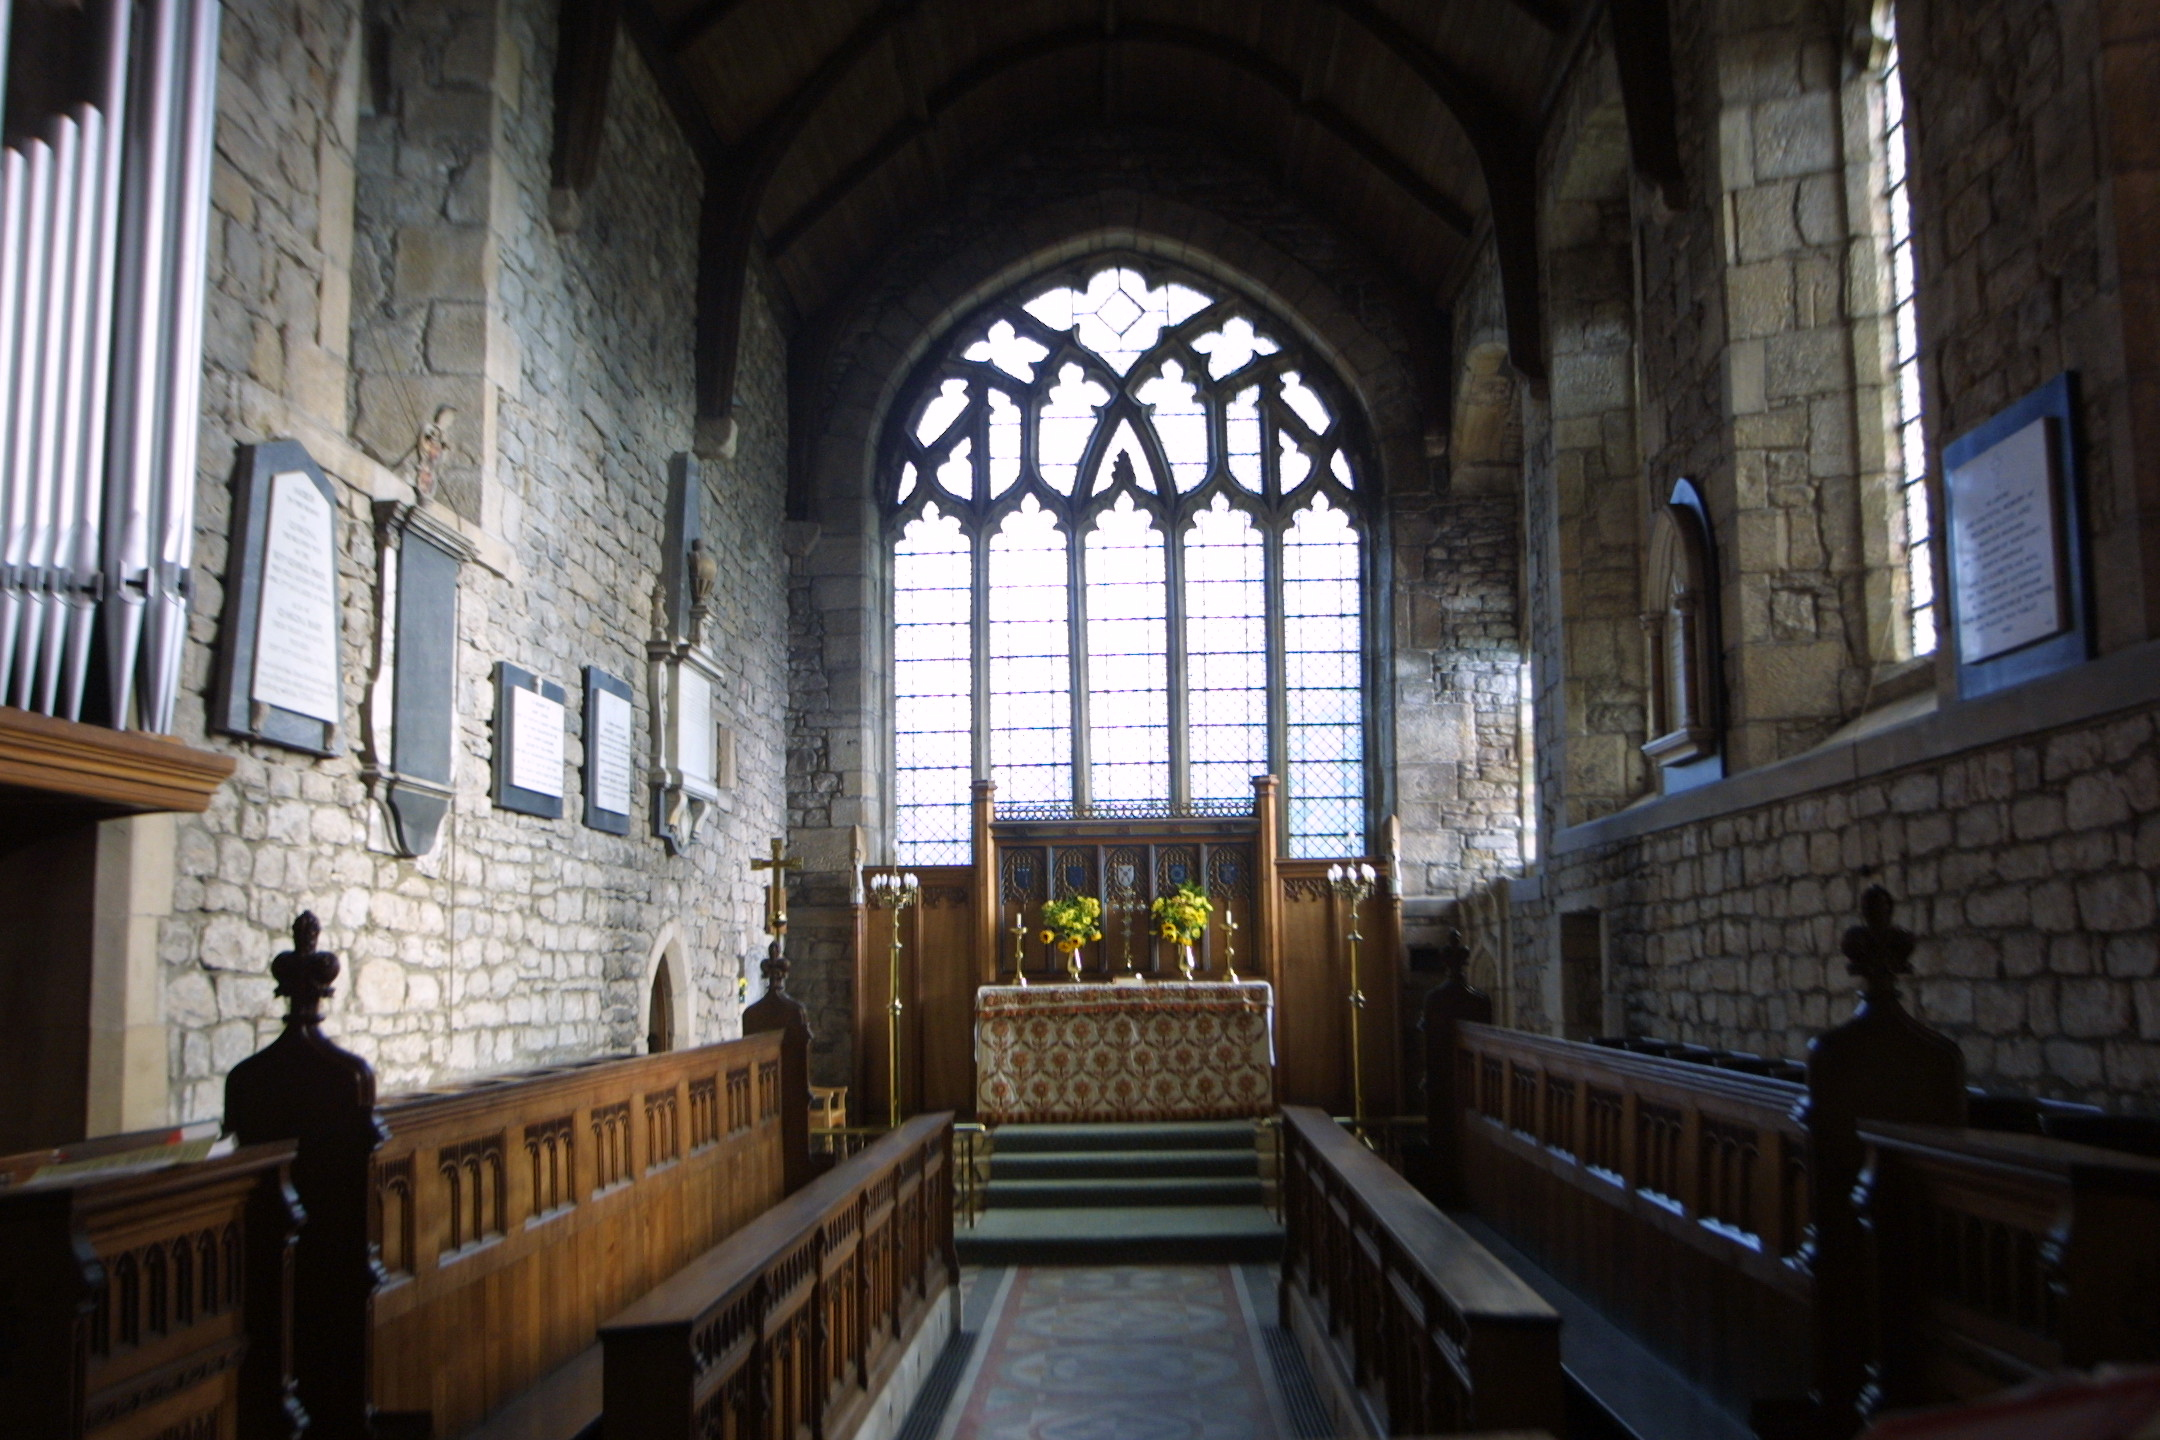 Inside Romaldkirk church. The plaque dedicated to Mary Louisa Cleveland, who died less than two years after her wedding, is on the left